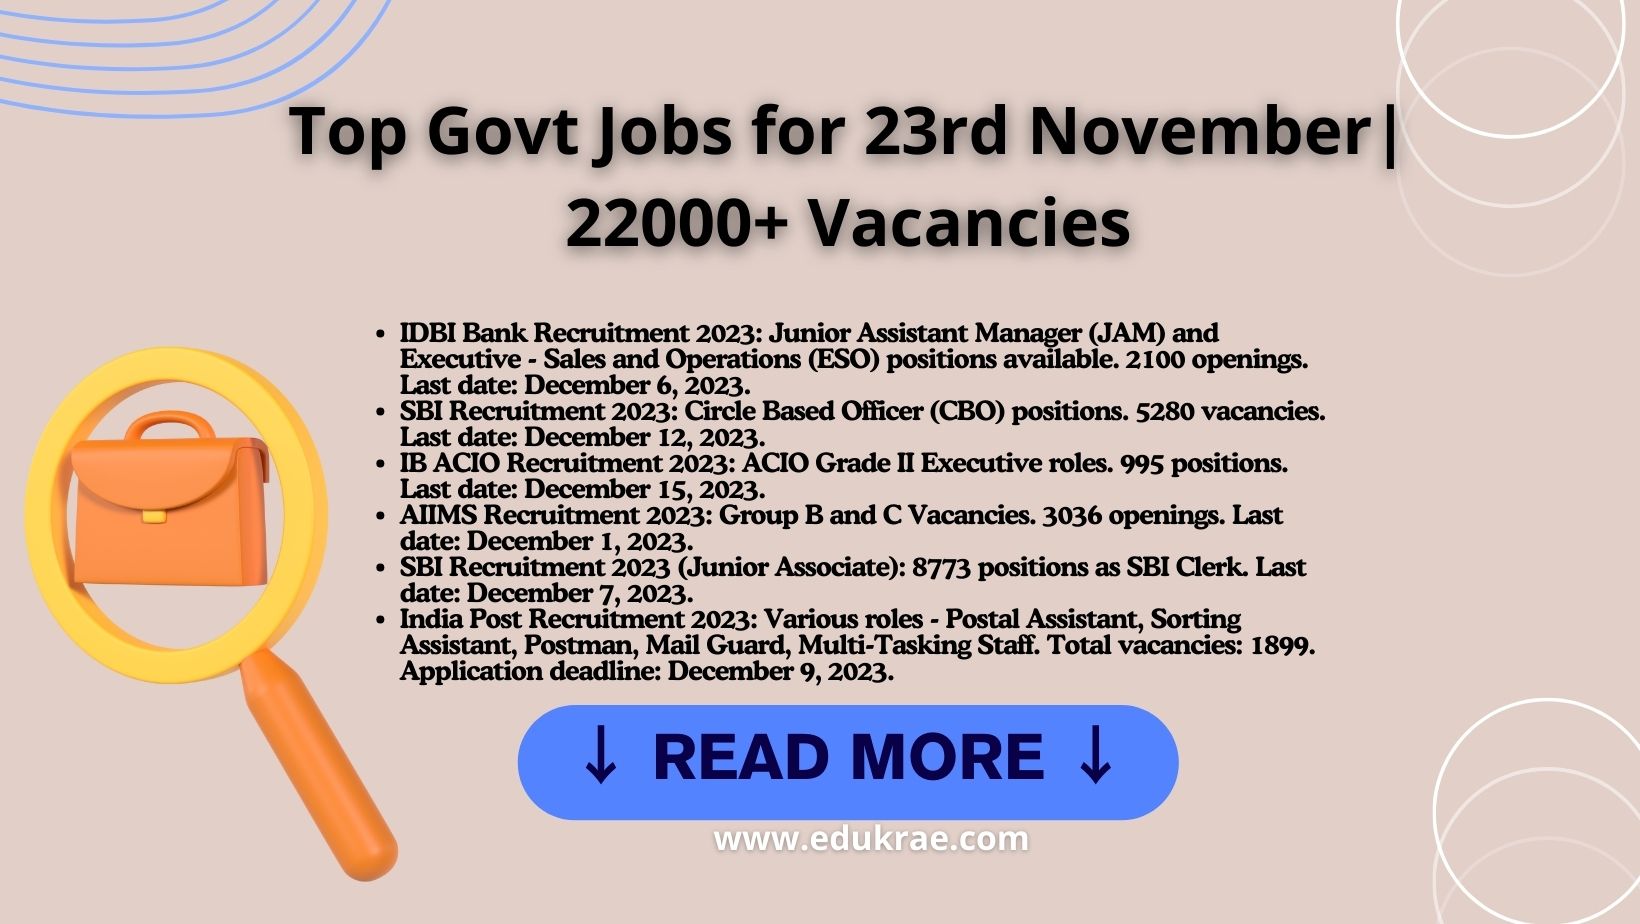 Top Govt Jobs for 23rd November Apply Now for 22000+ Opportunities in Banks, Medical, PSUs, and More